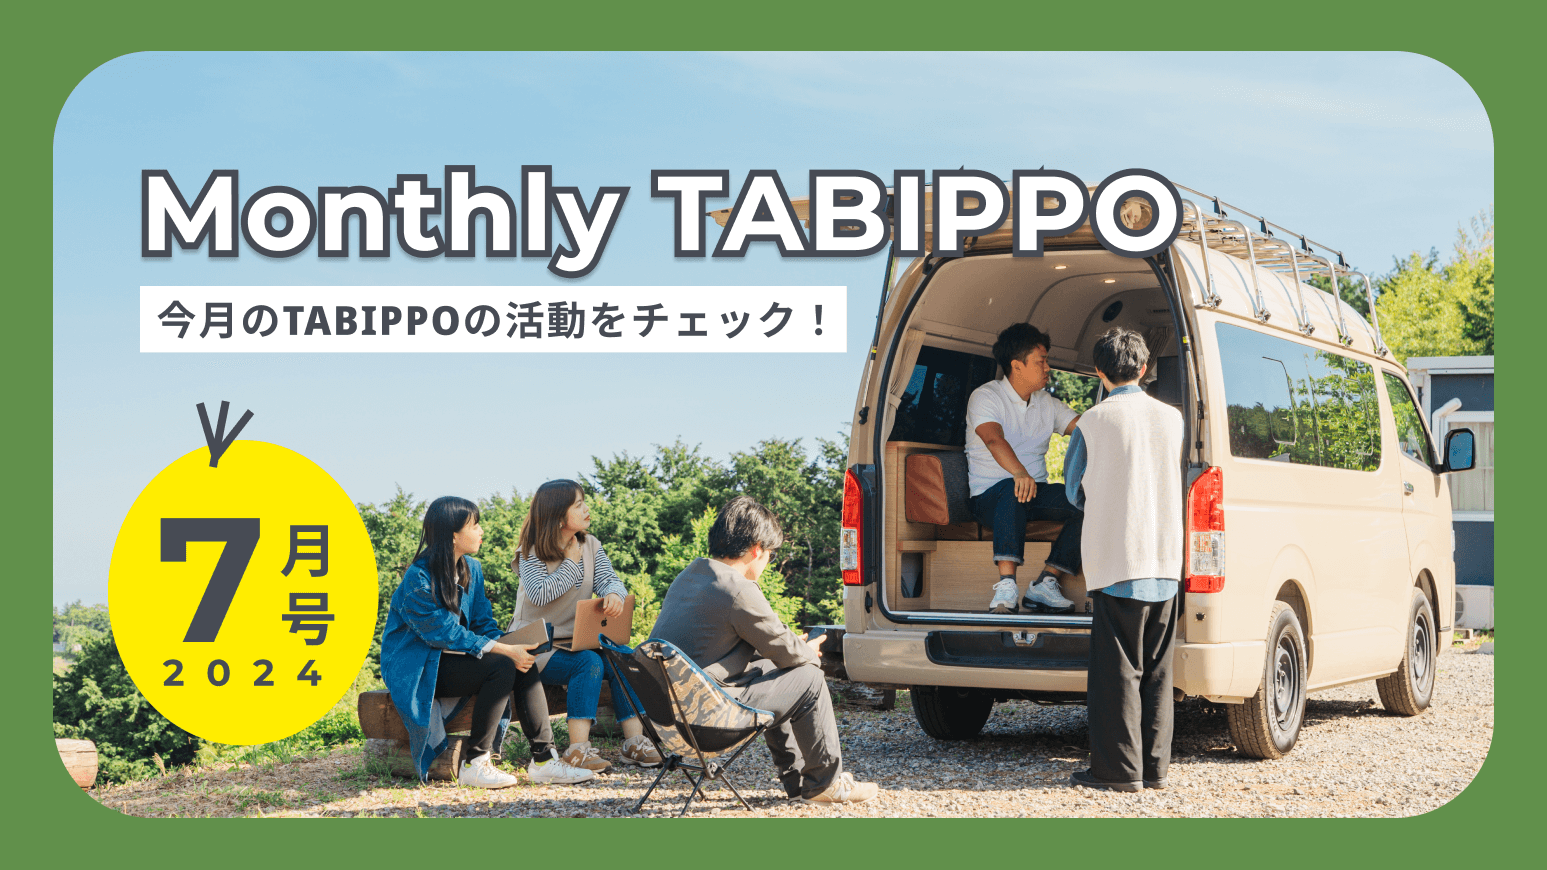 Monthly TABIPPO